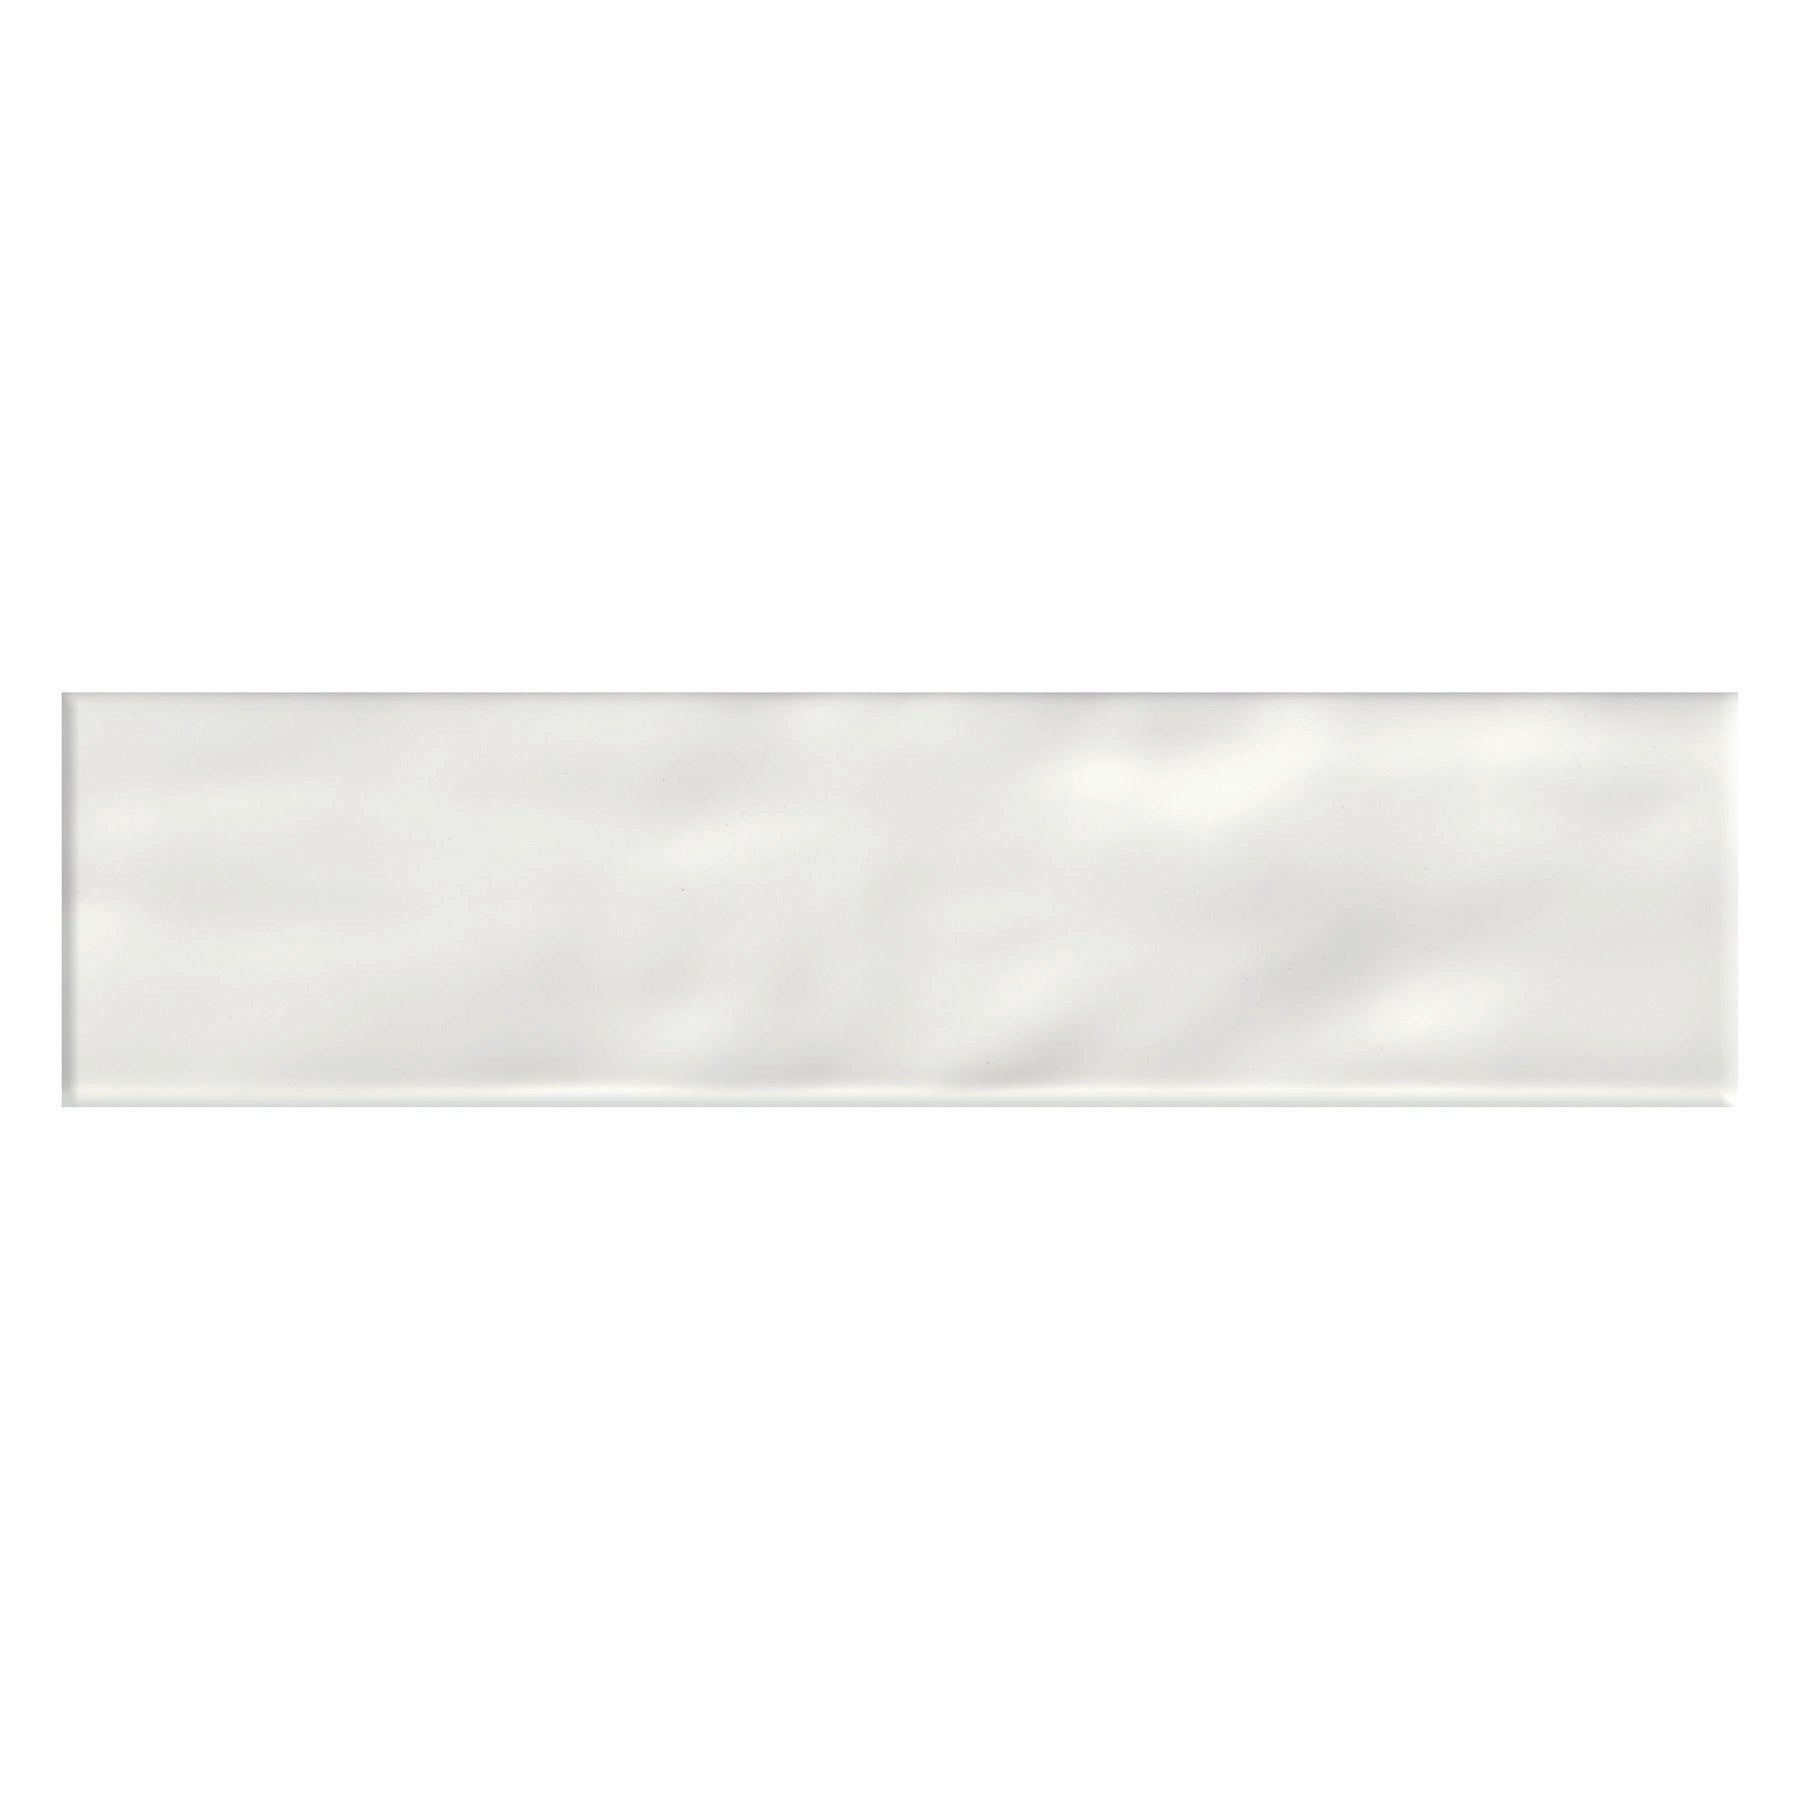 Daltile - Stagecraft - 3 in. x 12 in. Undulated Wall Tile - Matte Arctic White 0790